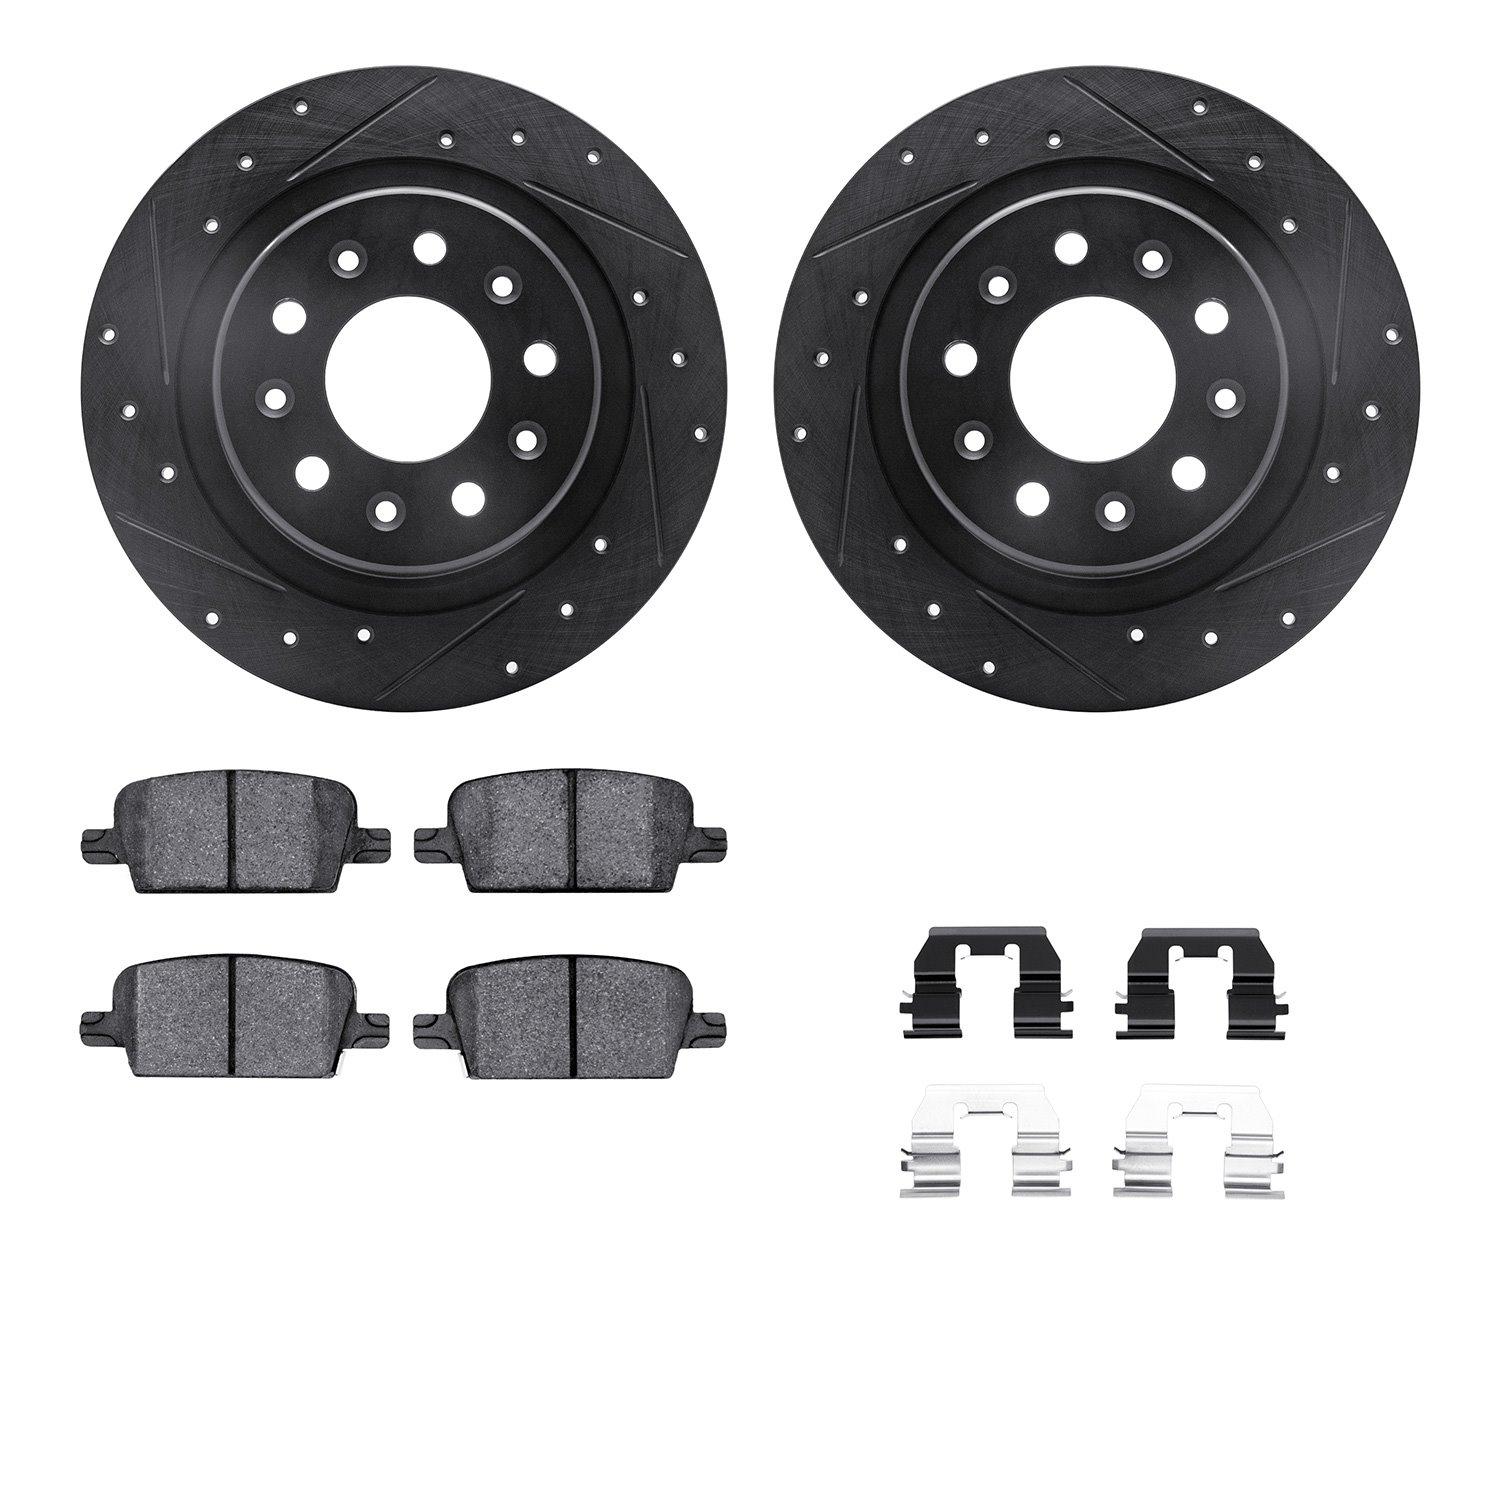 8312-47078 Drilled/Slotted Brake Rotors with 3000-Series Ceramic Brake Pads Kit & Hardware [Black], Fits Select GM, Position: Re